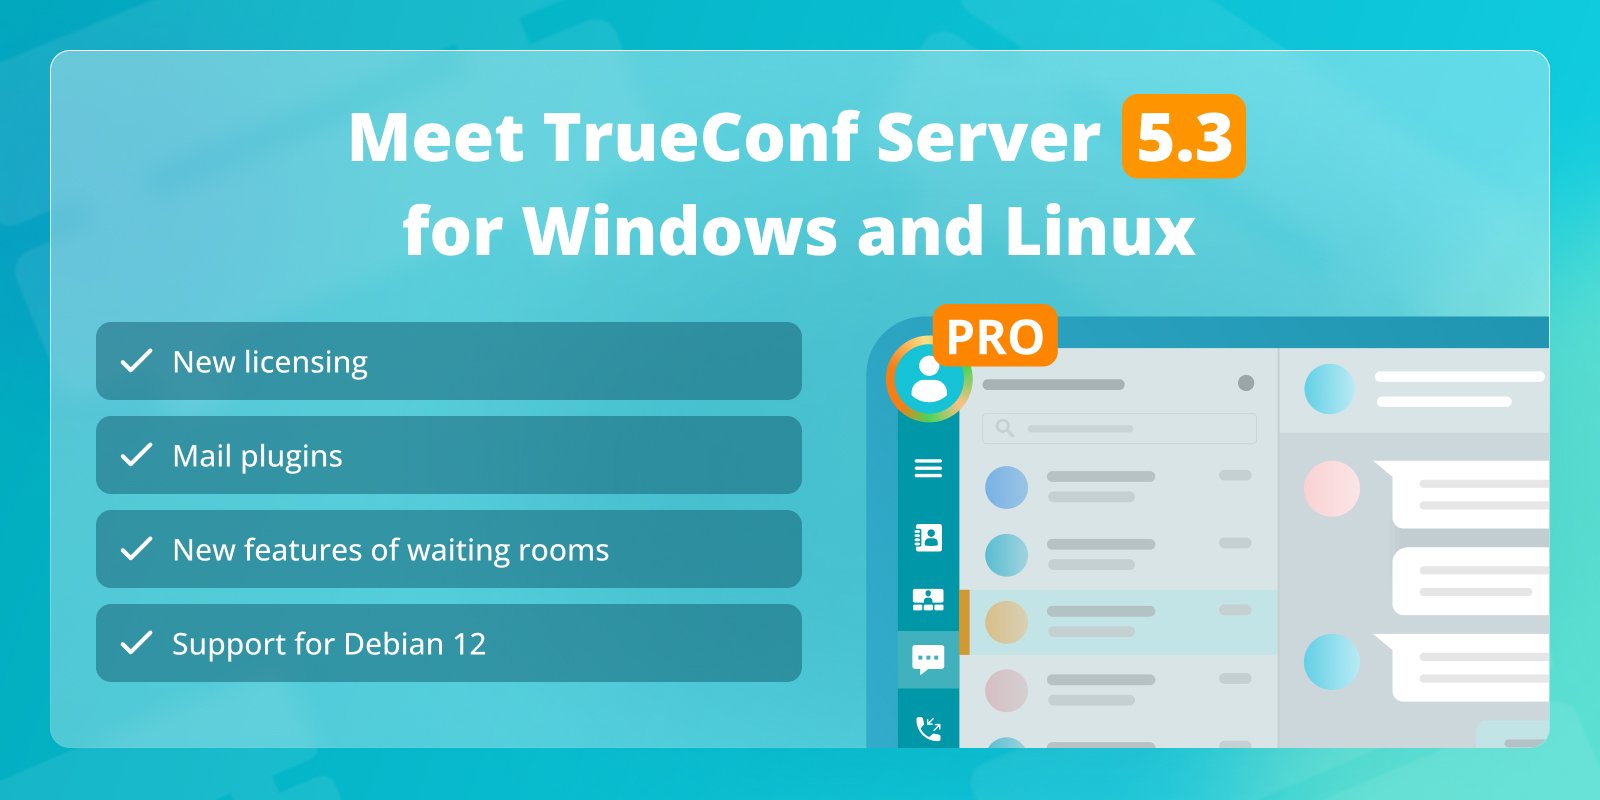 TrueConf Server 5.3 major update: new licensing, mail plugins, and support for Debian 12 1